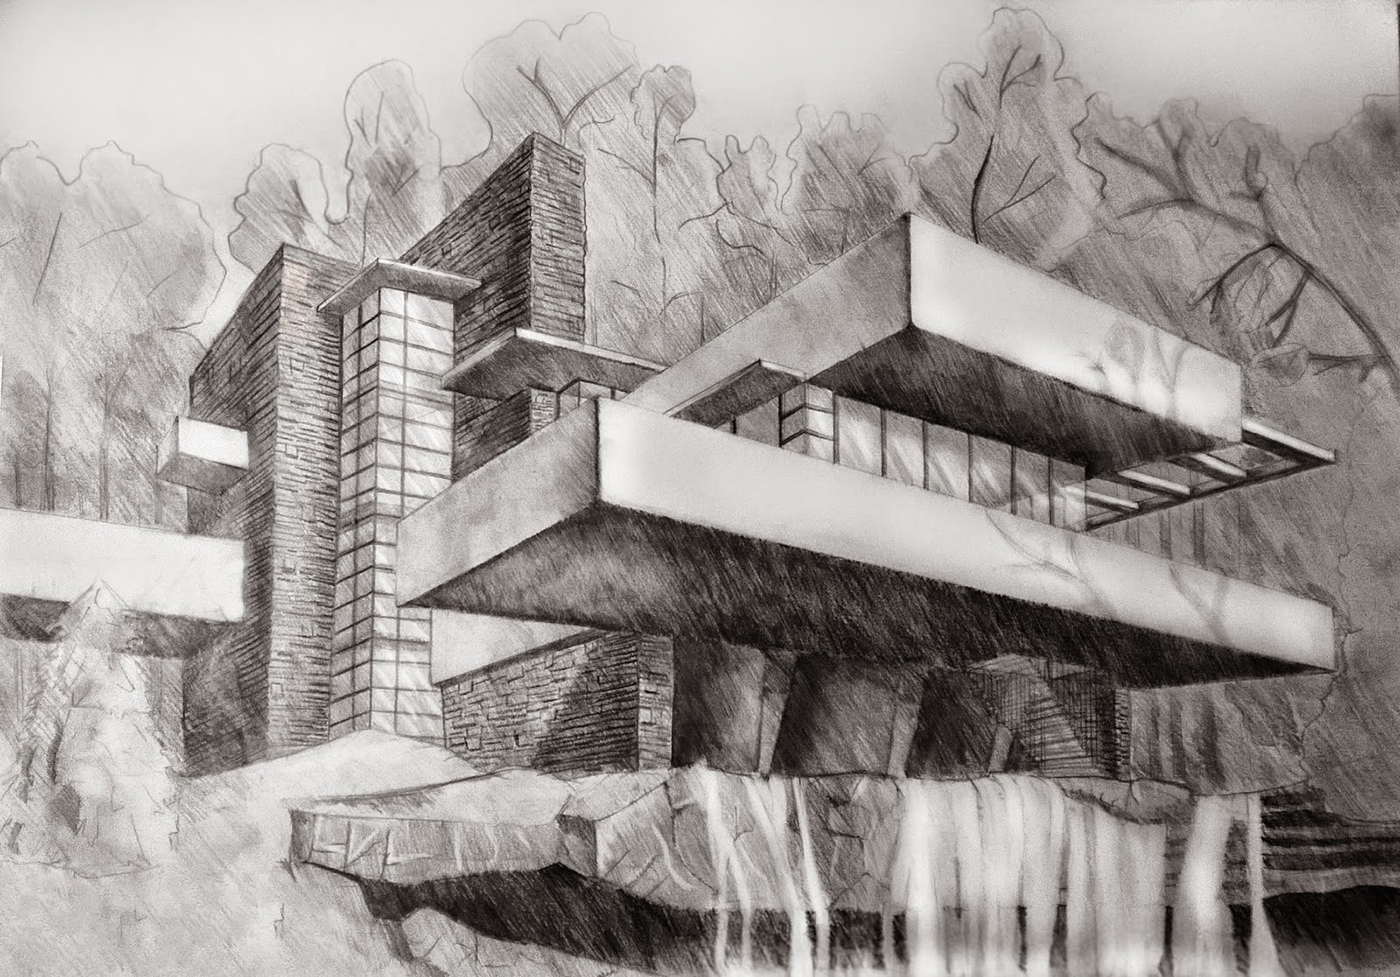 Architectural pencil sketches on Behance